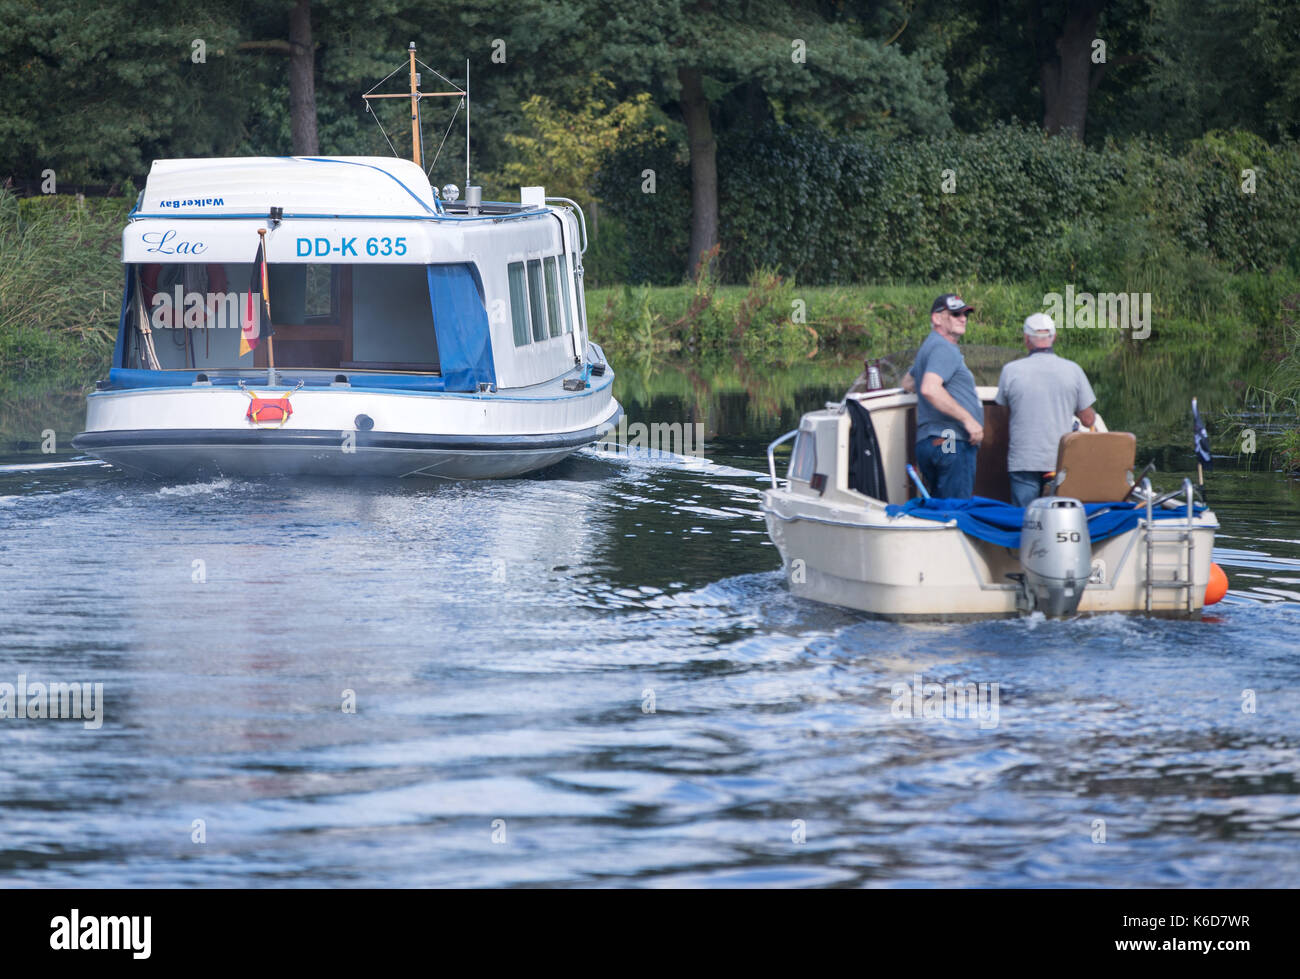 Bazkow, Germany. 28th Aug, 2017. Motorboats can be seen on Elde ...